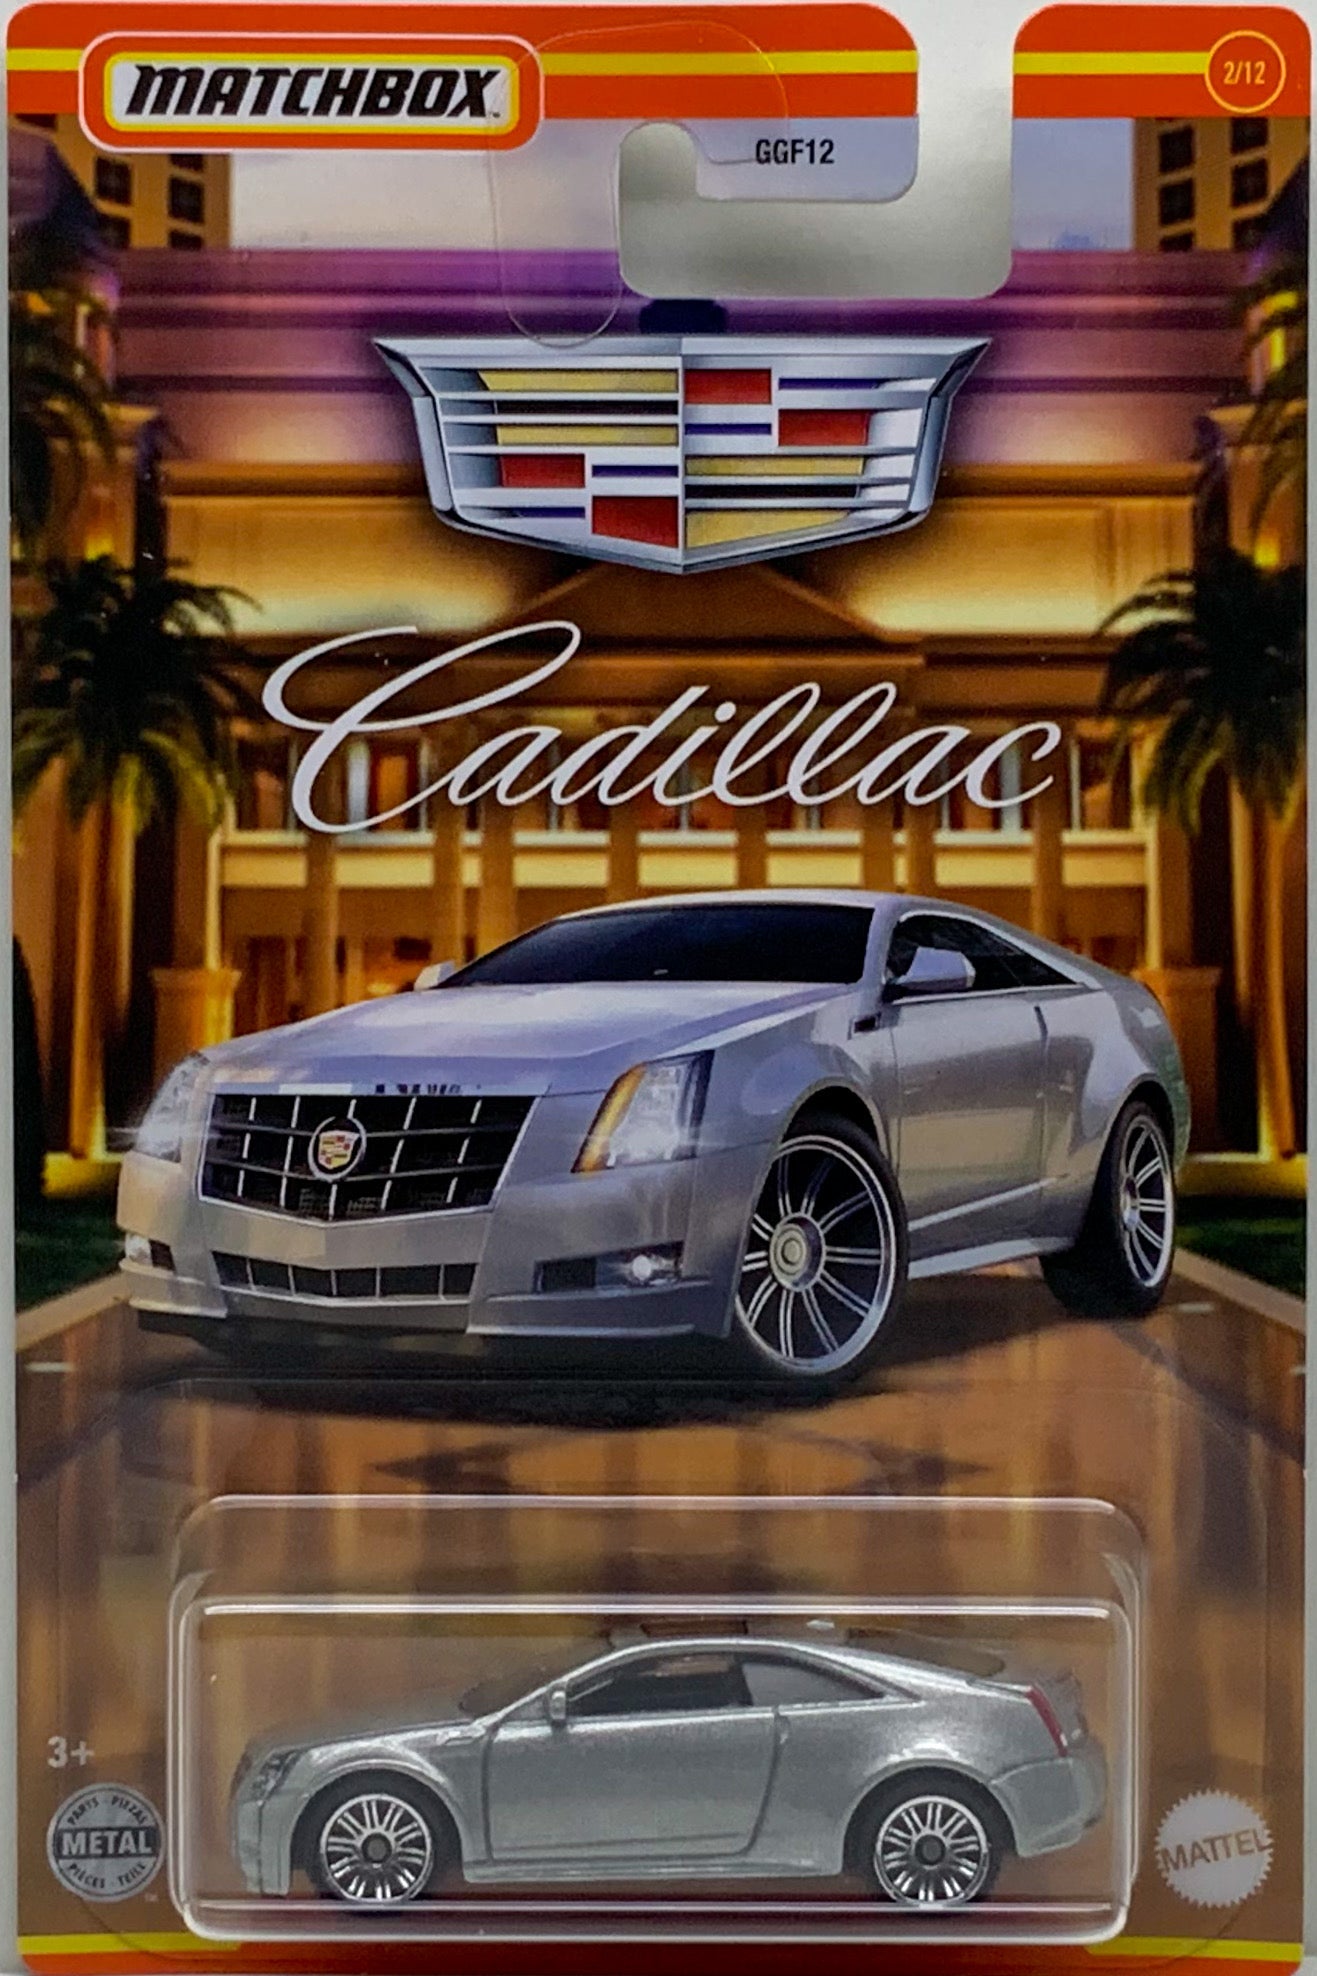 Buy at Tatoy Matchbox Cadillac Series Cadillac CTS Coupe number 2 from set of 12 Mattel GGF12